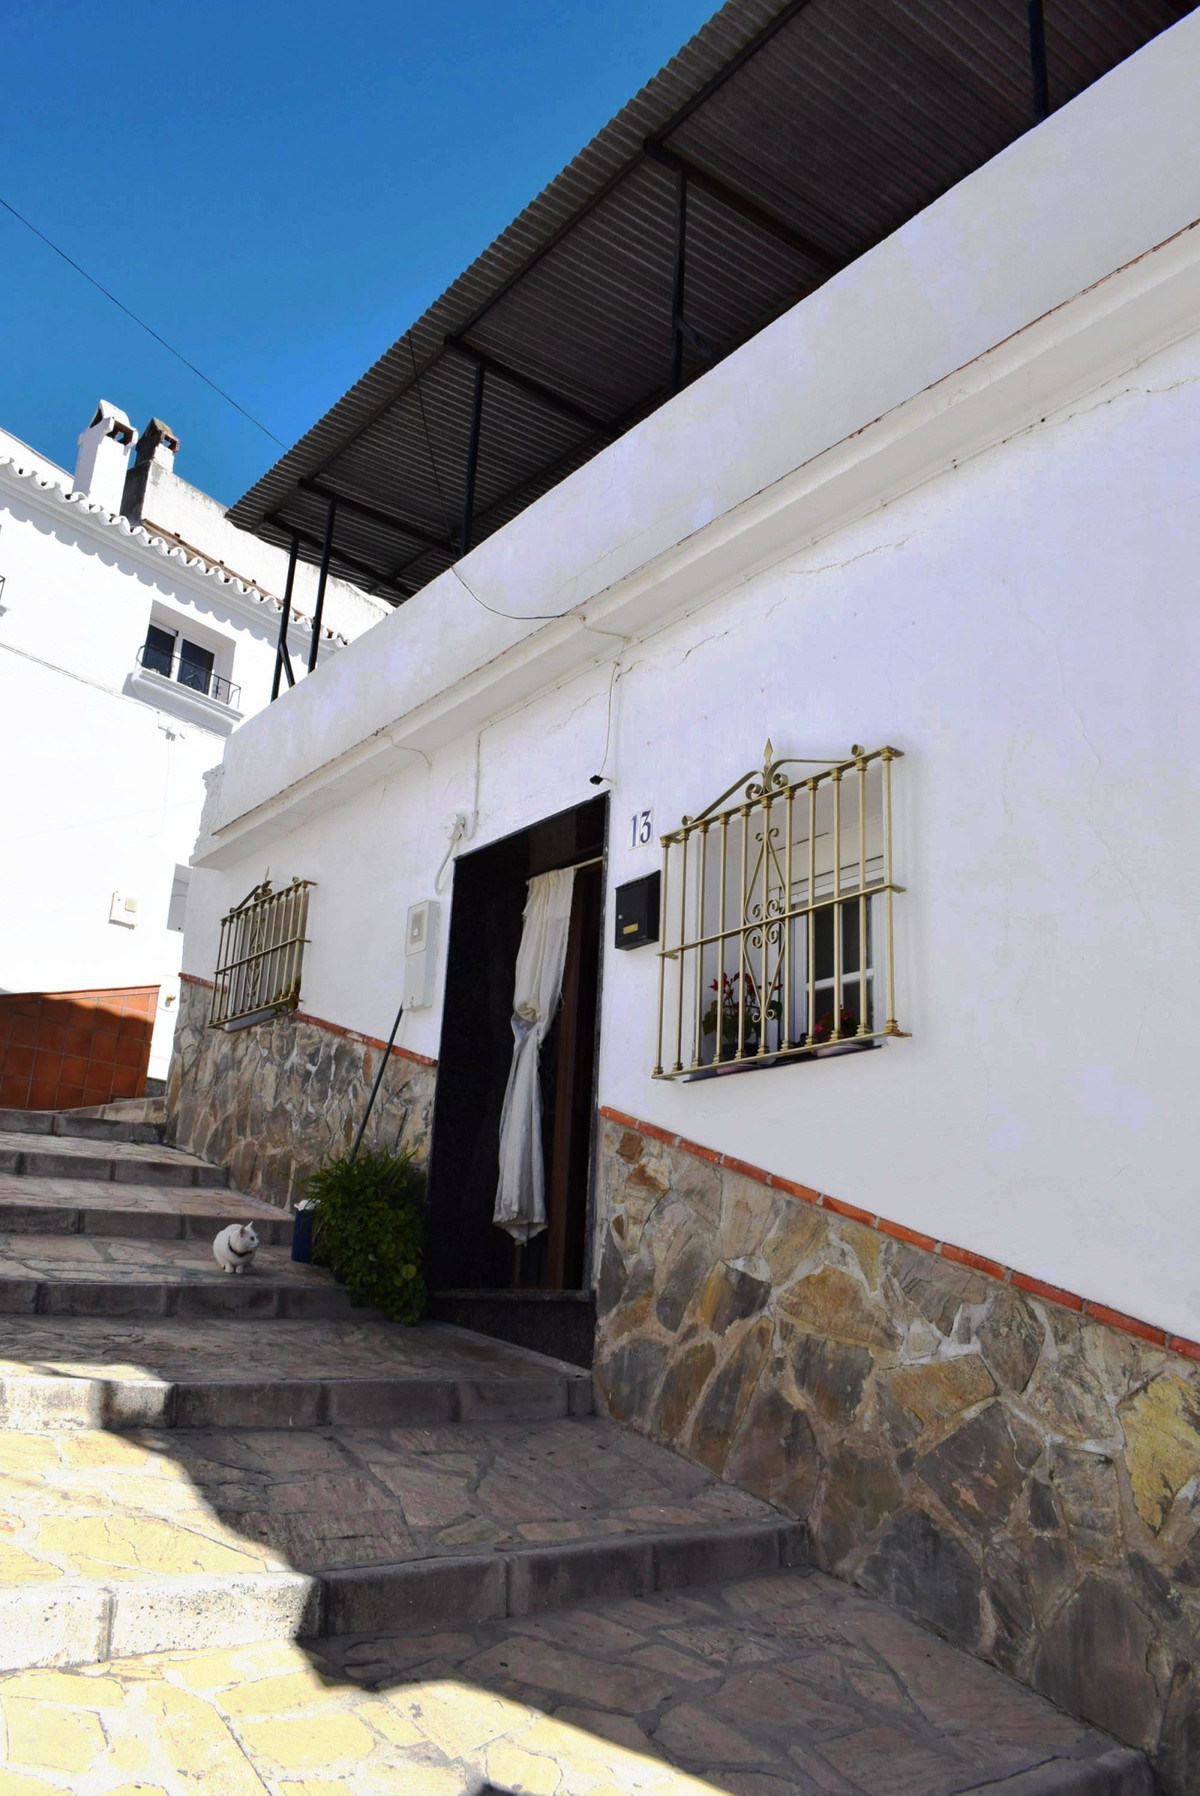 This townhouse in the center of Algorrobo contains 3 bedrooms, lounge/dining, 1 bathroom, 1 utility room a storage room and a very spacious roof te...